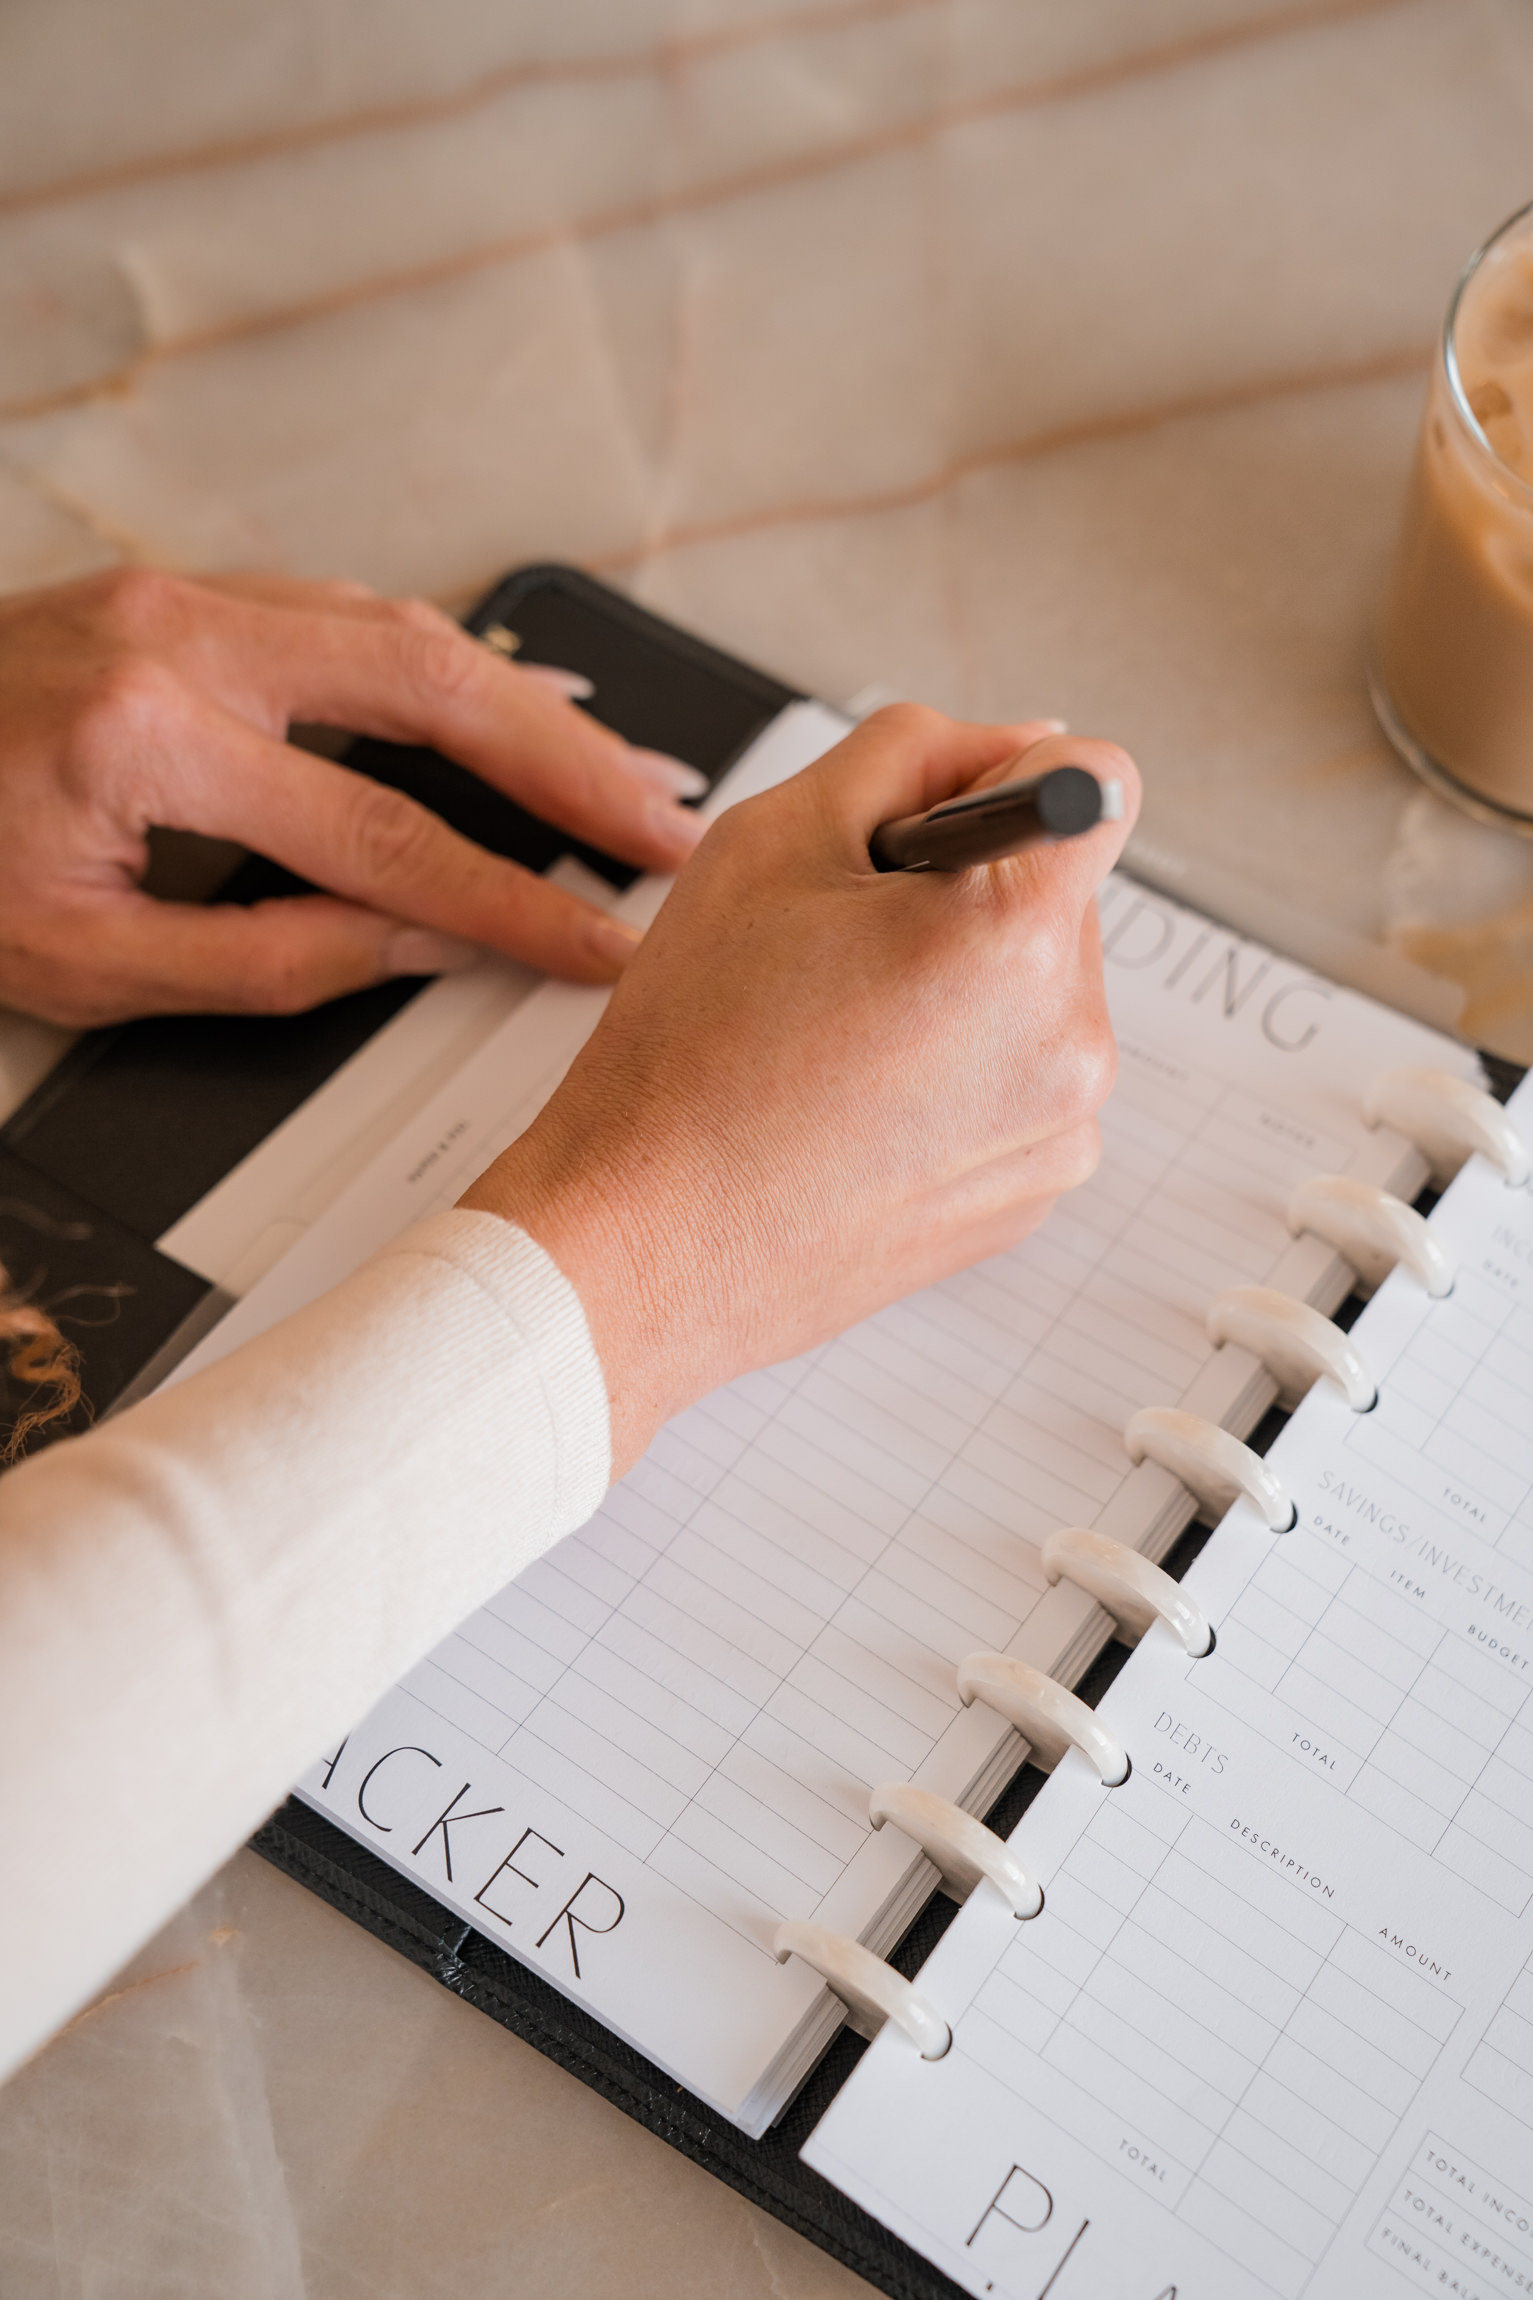 Woman adding tasks on her calendar and overcoming excuses.